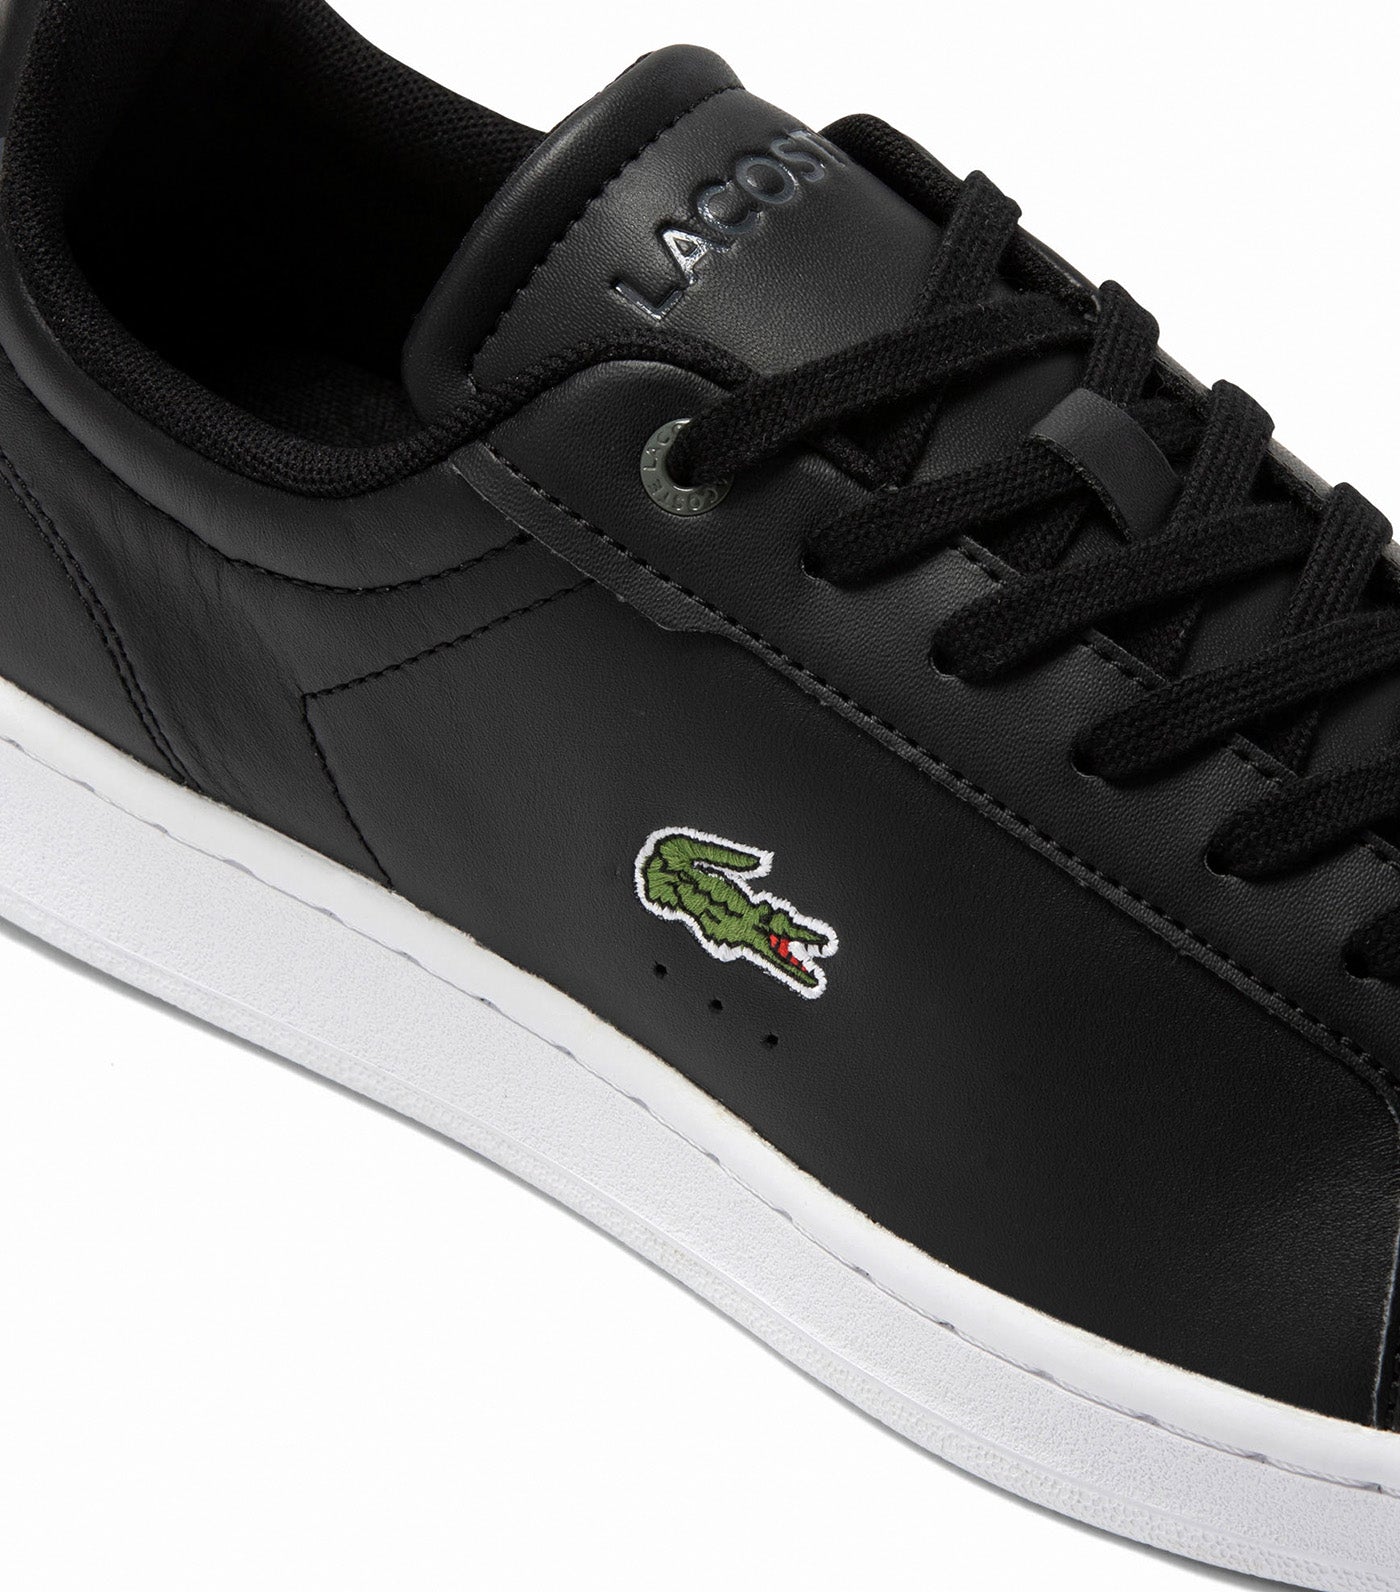 Men's Lacoste Carnaby Pro BL Leather Tonal Sneakers Black/White